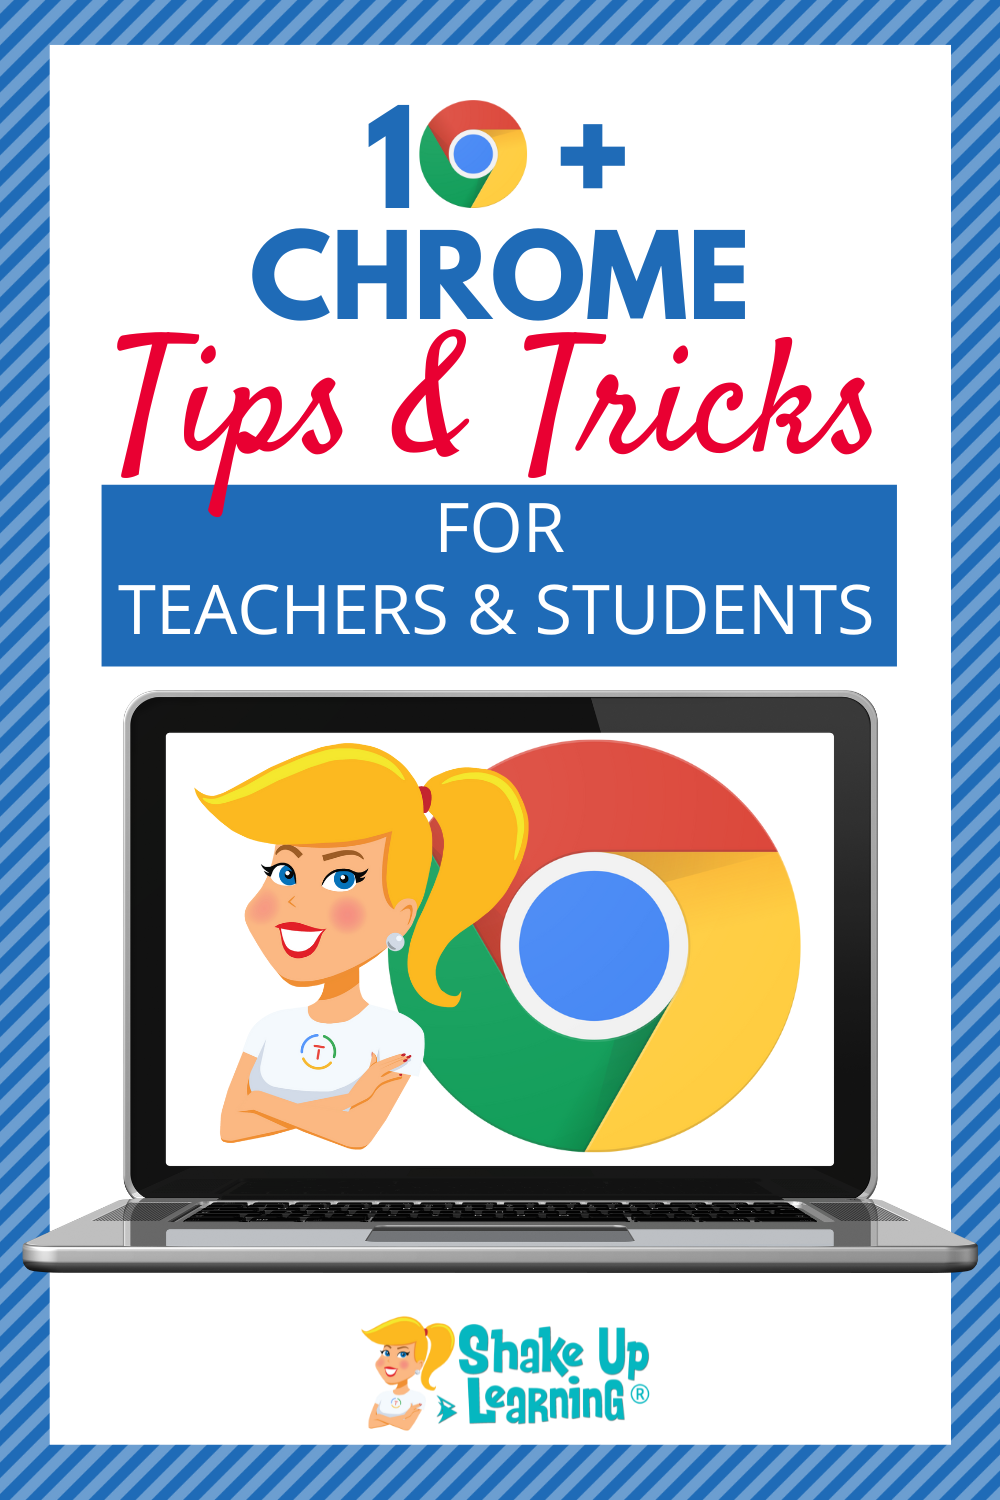 10+ Chrome Tips and Tricks for Teachers and Students –
SULS0165